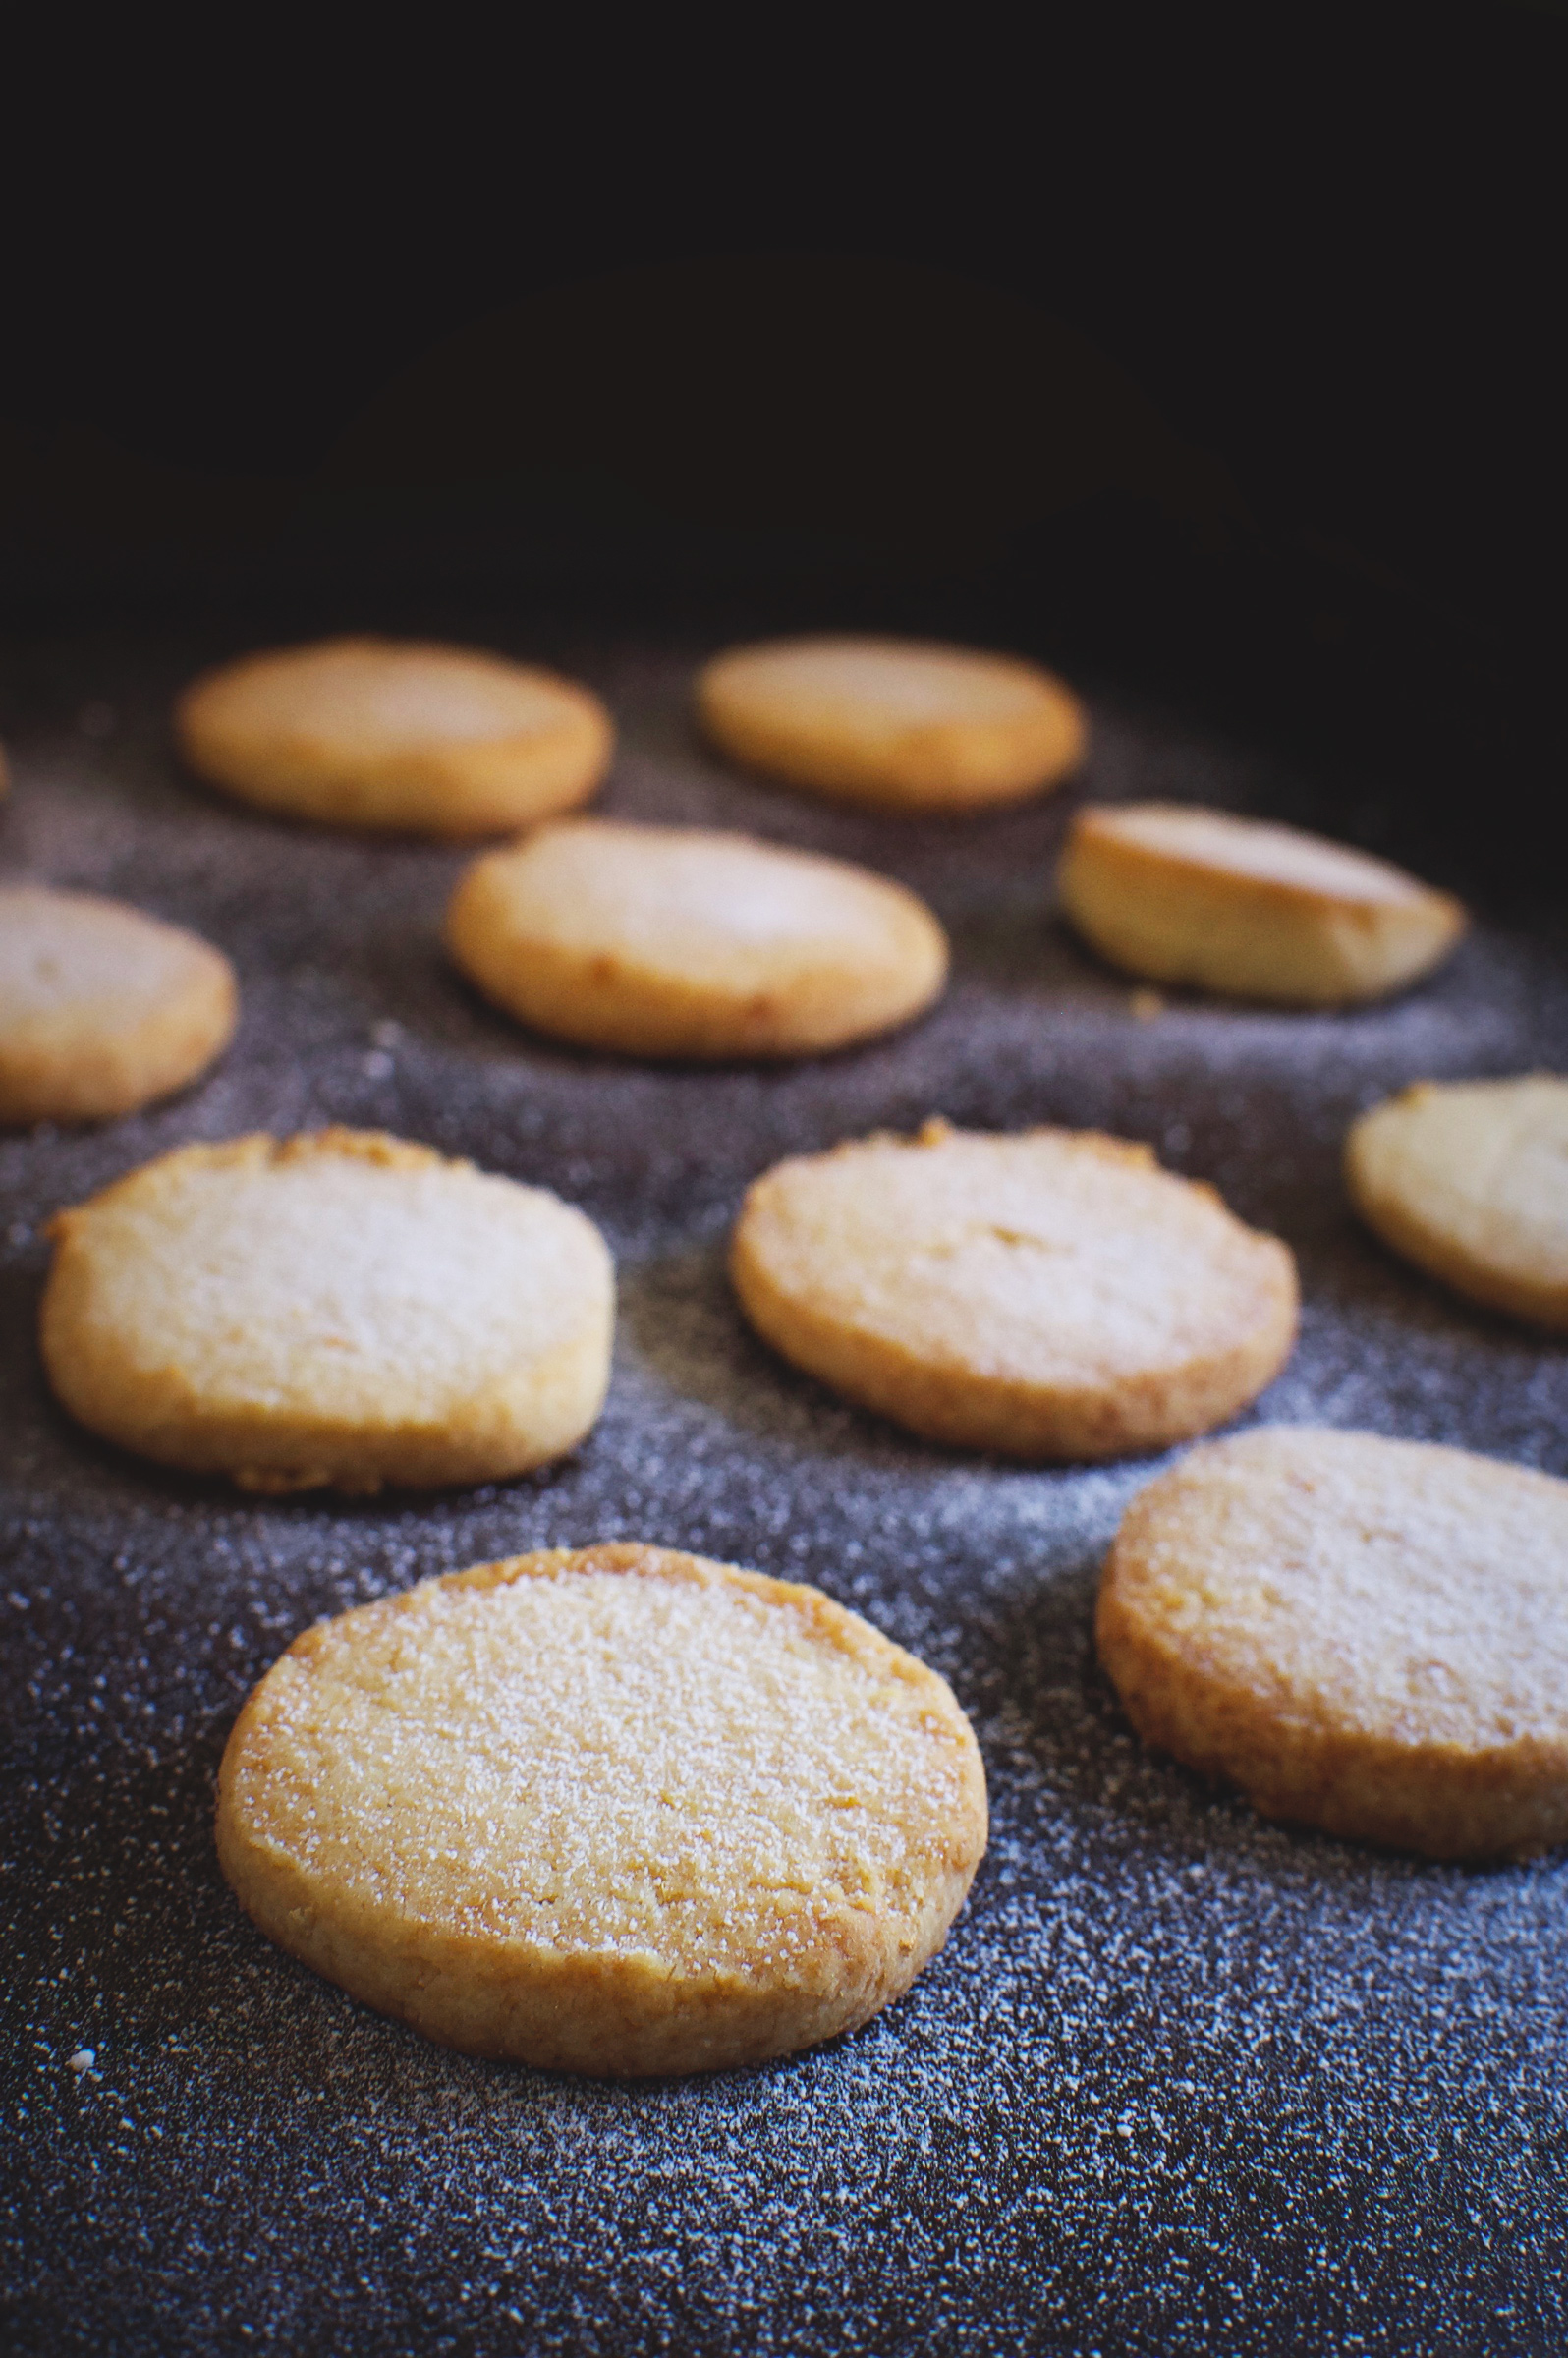 Indulge in Delicious and Nutritious Low-Sugar Cookies for Guilt-Free Treats!